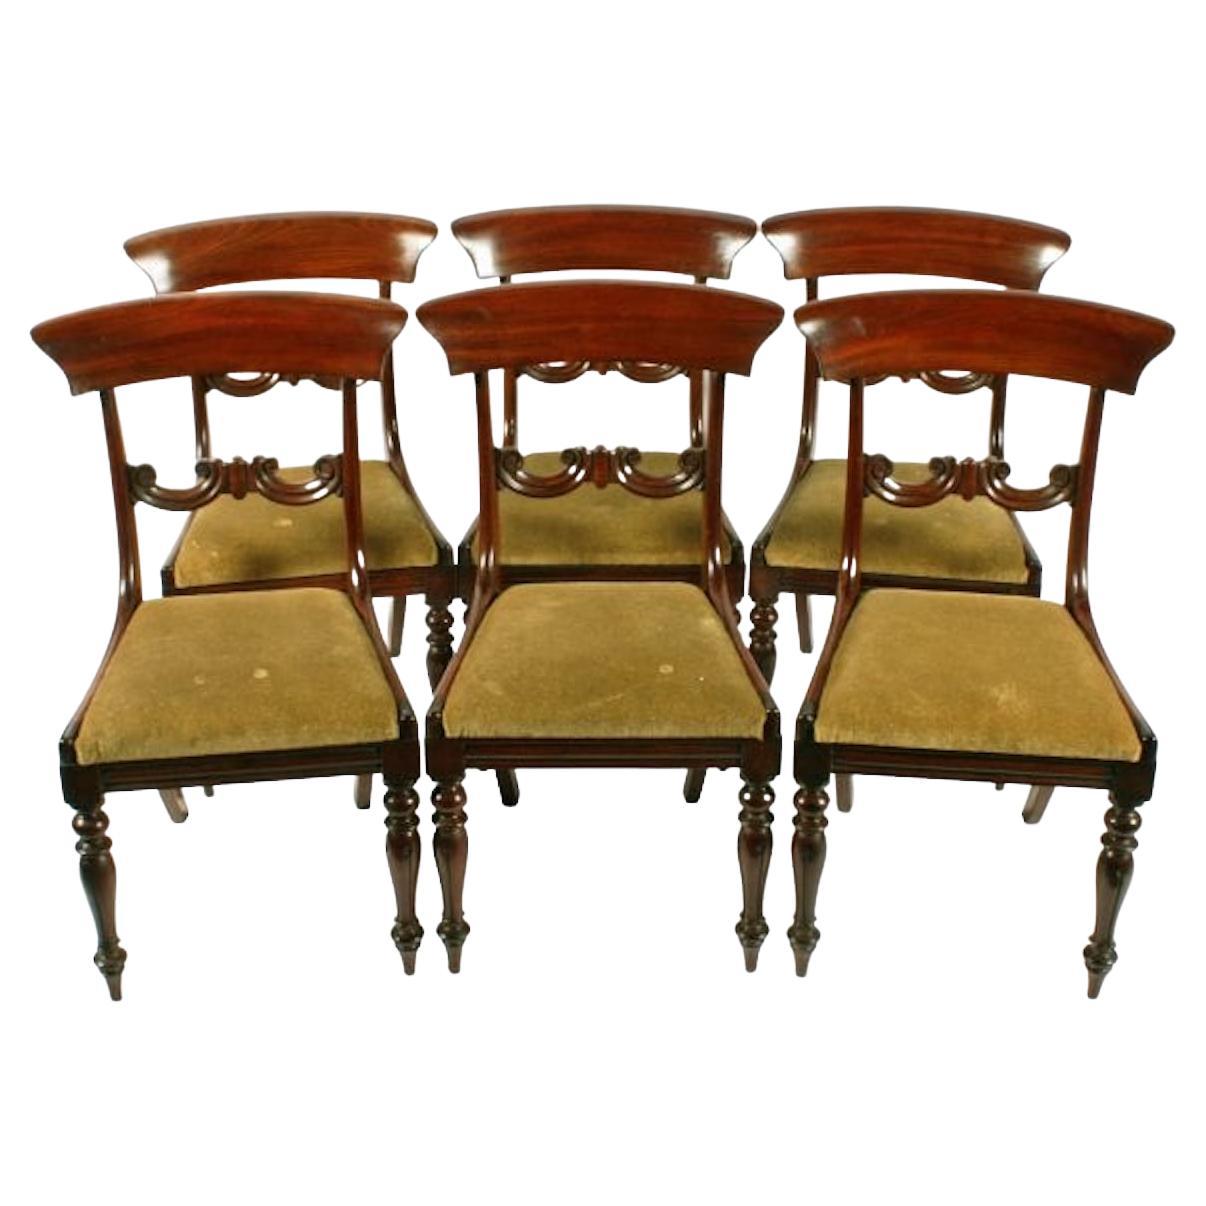 Set of Six Mahogany Chairs, 19th Century For Sale